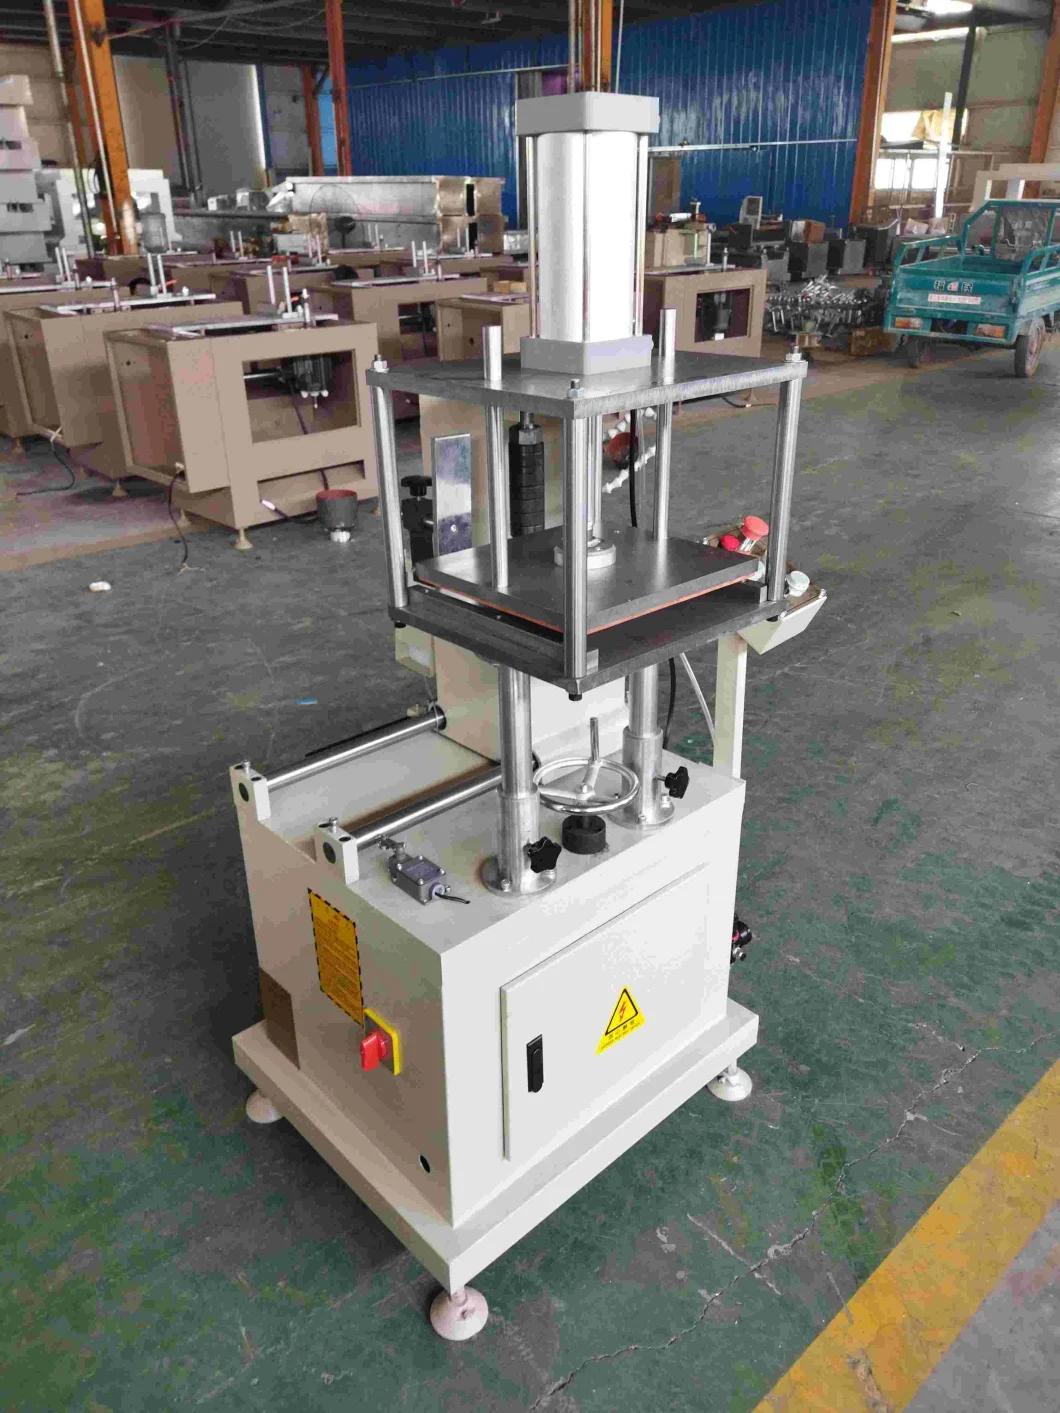 Lxd-200A Aluminum Profile Milling Machine for End Faces CNC Machine for Aluminum Doors and Windows Making CNC Cutter